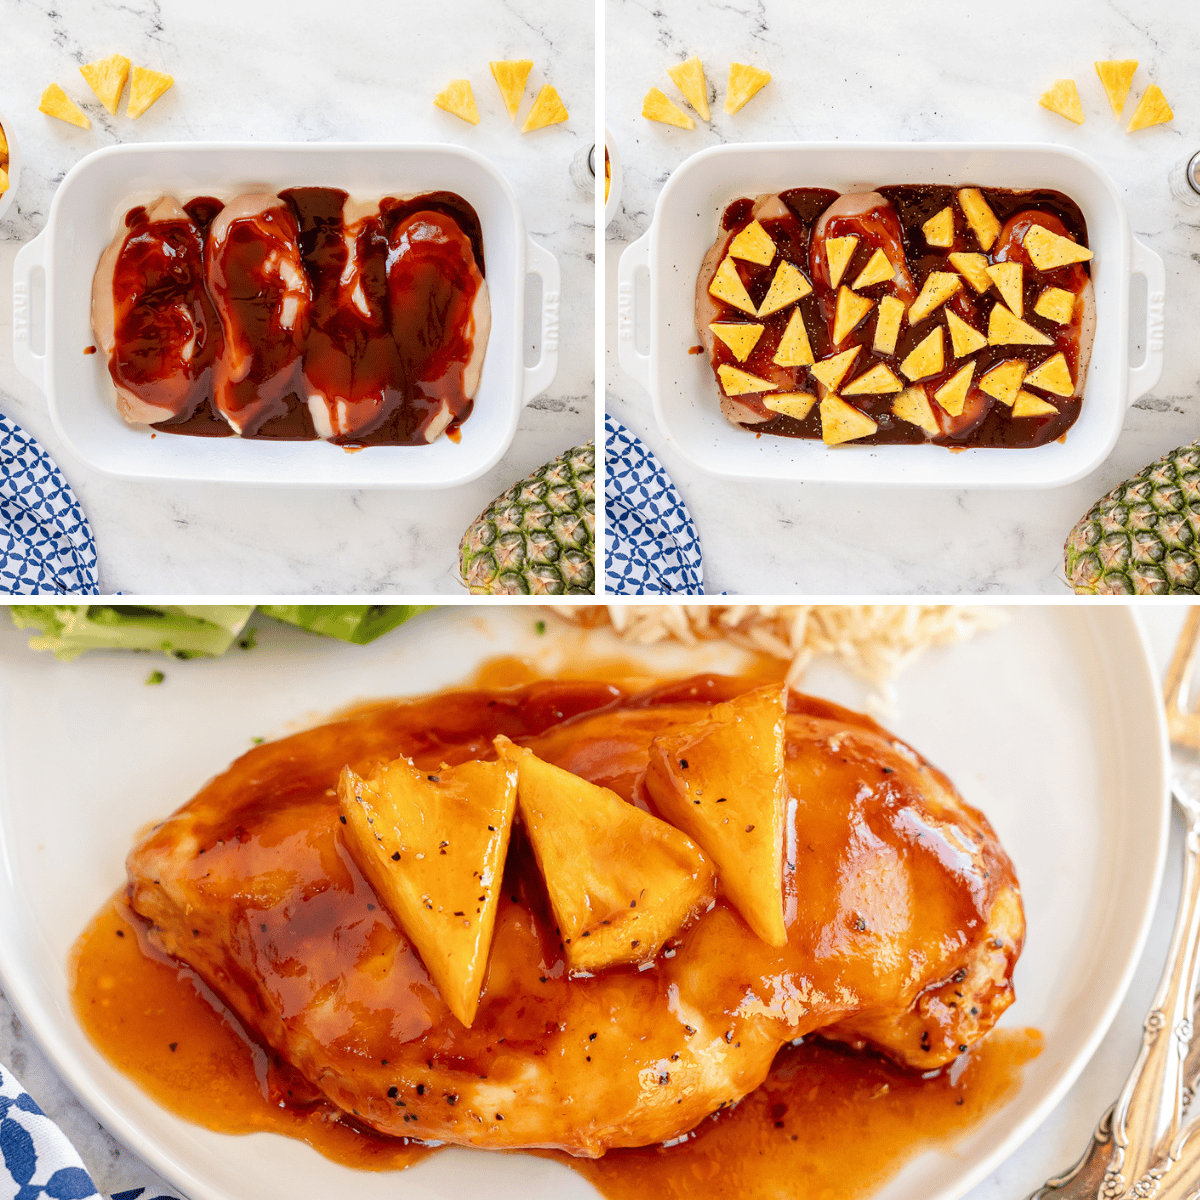 bbq sauce and pineapple laid on chicken breast in baking dish